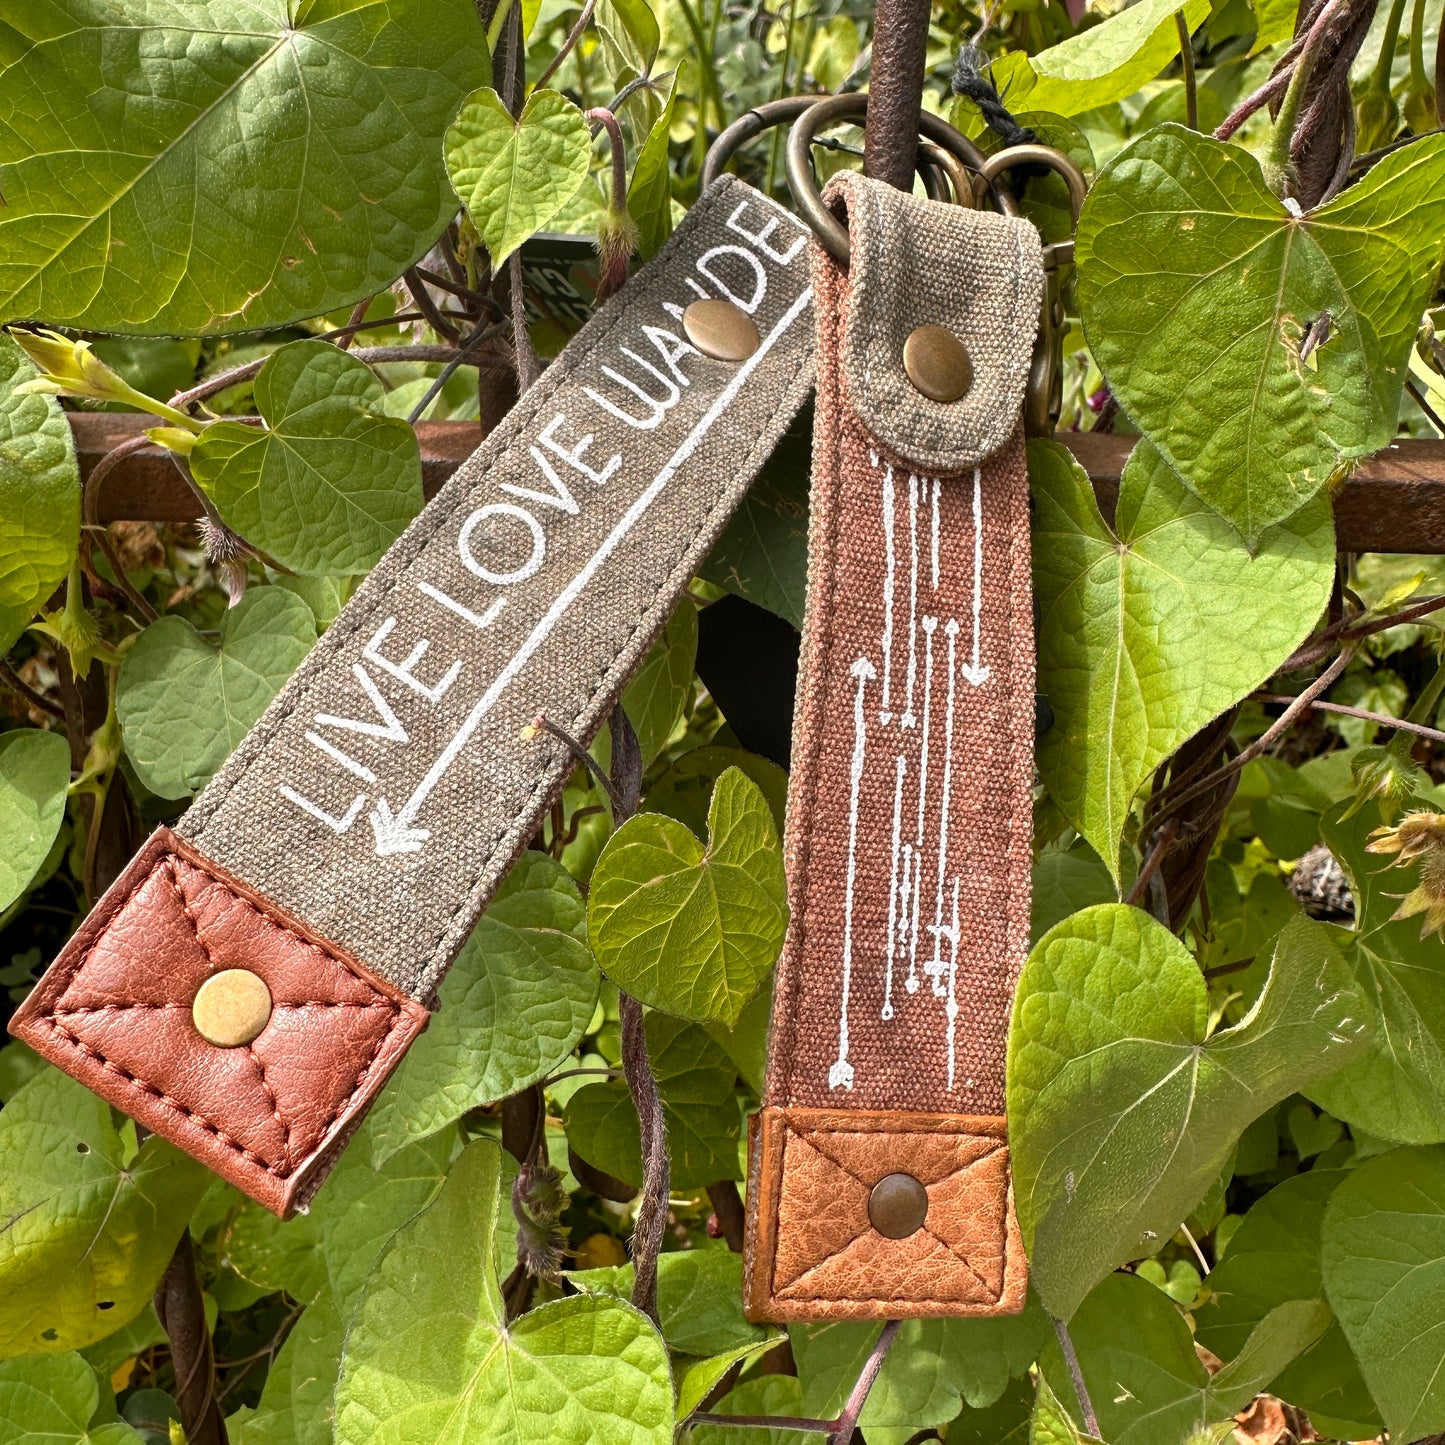 Up-Cycled Canvas Live Love Wander Key Fob